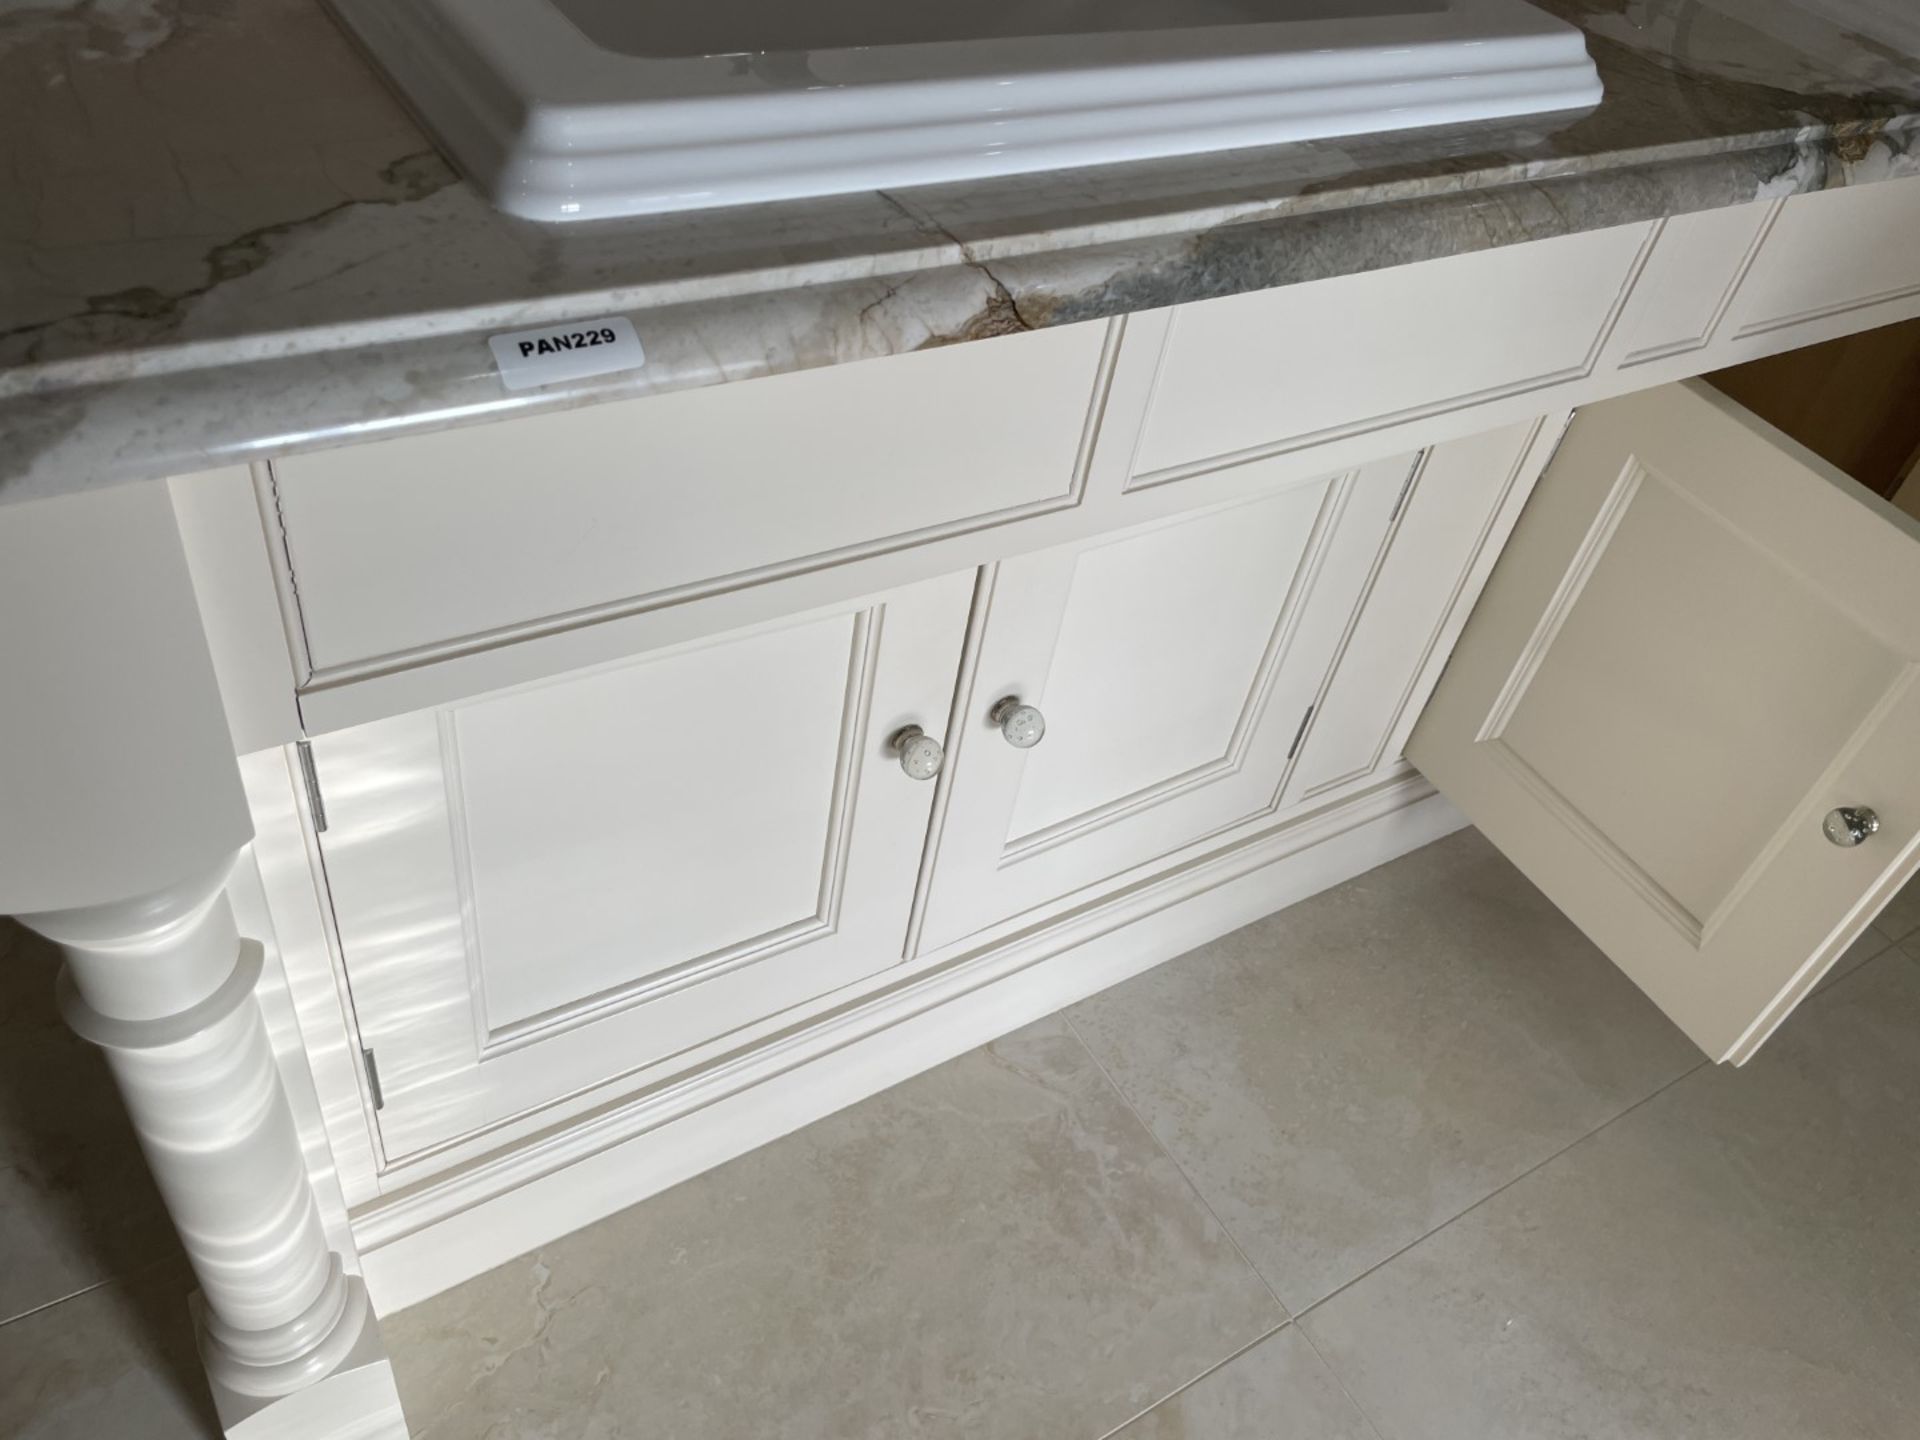 1 x Bespoke Marble-topped Solid Wood Double Vanity Unit with 2 x Villeroy & Boch Basins + Taps - Image 28 of 33